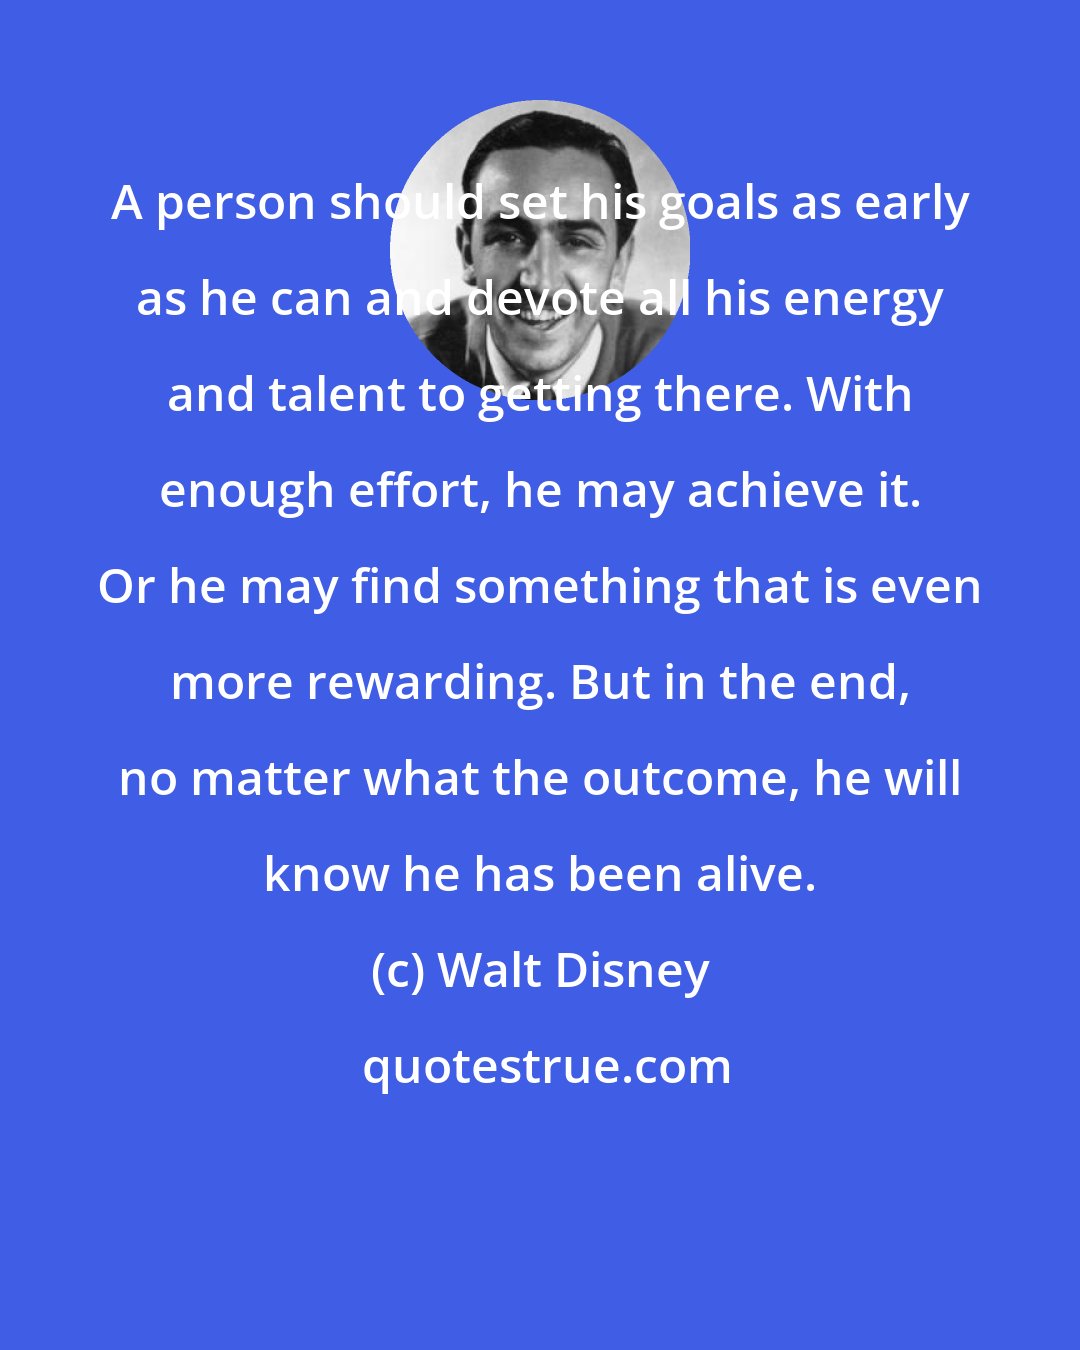 Walt Disney: A person should set his goals as early as he can and devote all his energy and talent to getting there. With enough effort, he may achieve it. Or he may find something that is even more rewarding. But in the end, no matter what the outcome, he will know he has been alive.